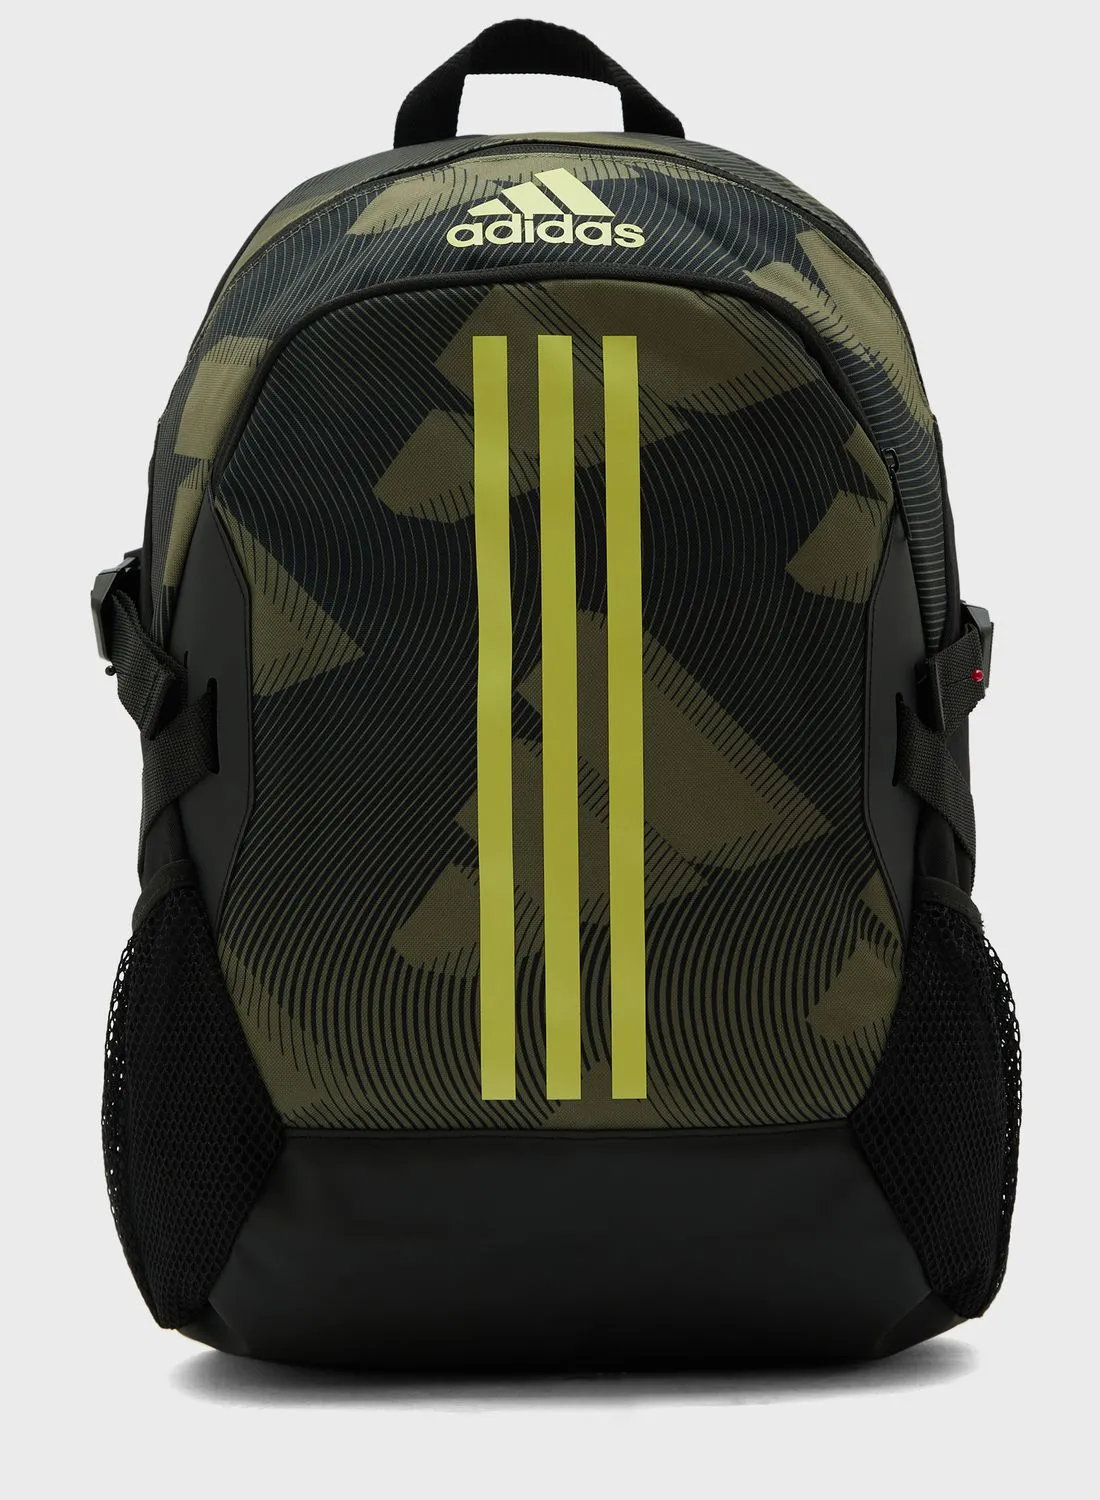 Adidas Power V Graphic Backpack